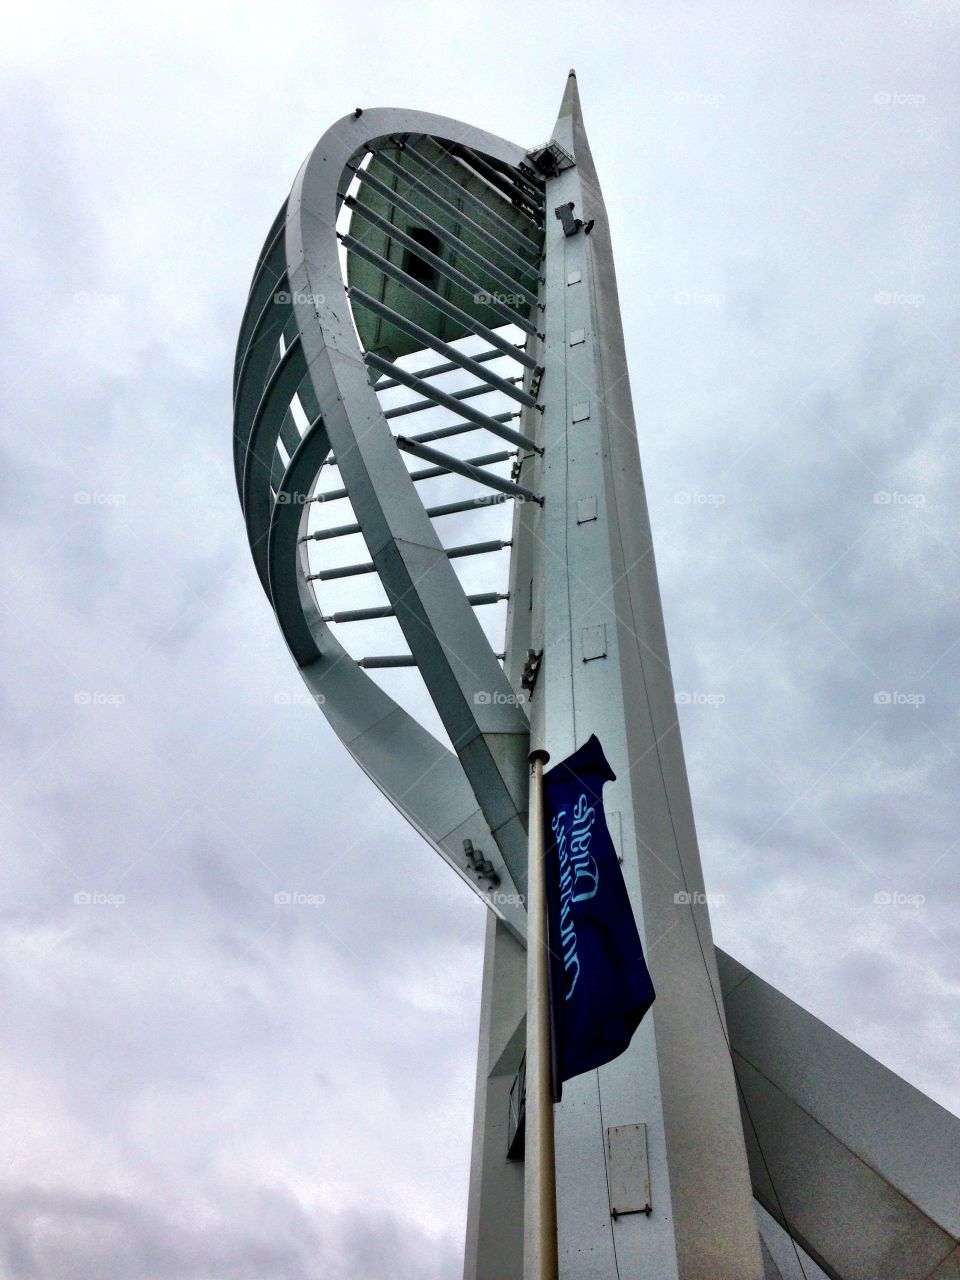 The Spinnaker Tower, Portsmouth, England.